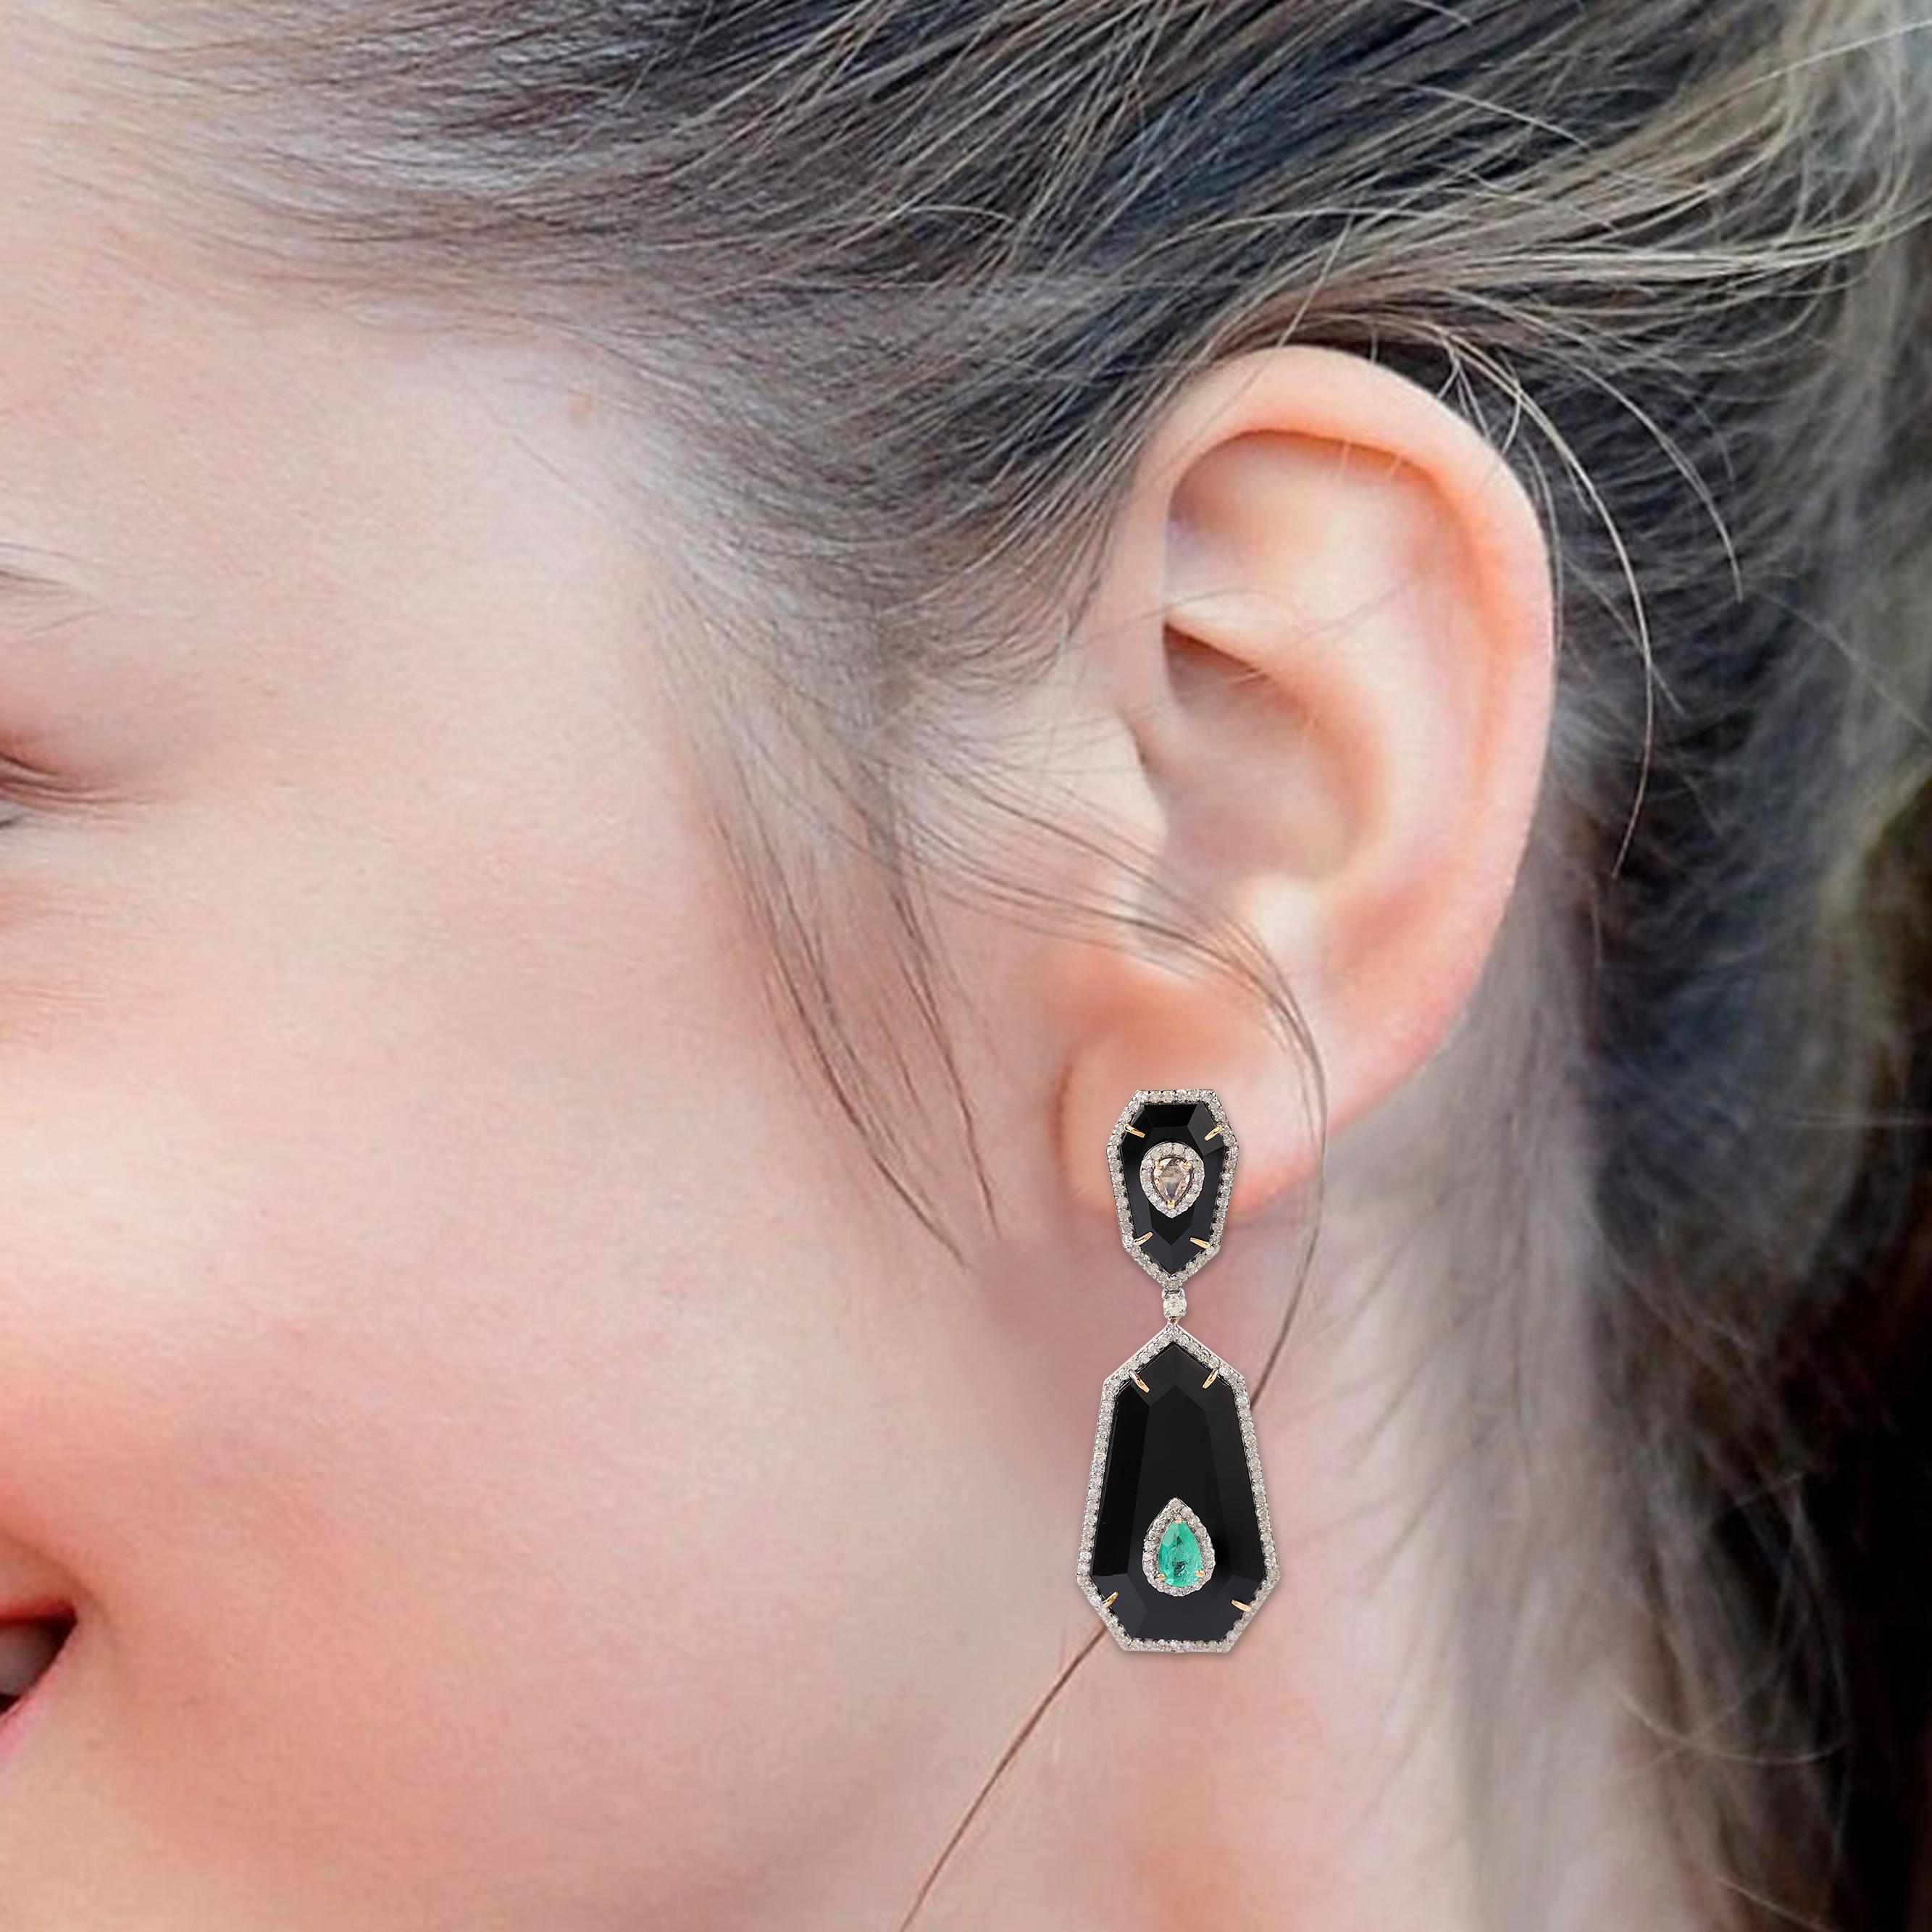 26.97 Carats Diamond, Emerald, and Black Onyx Drop Earrings in Modern Style

The exquisute and artistic design with which this set of earrings is crafted, speaks a lot about it. Scintilating design and amazing combination of black onyx, diamonds and